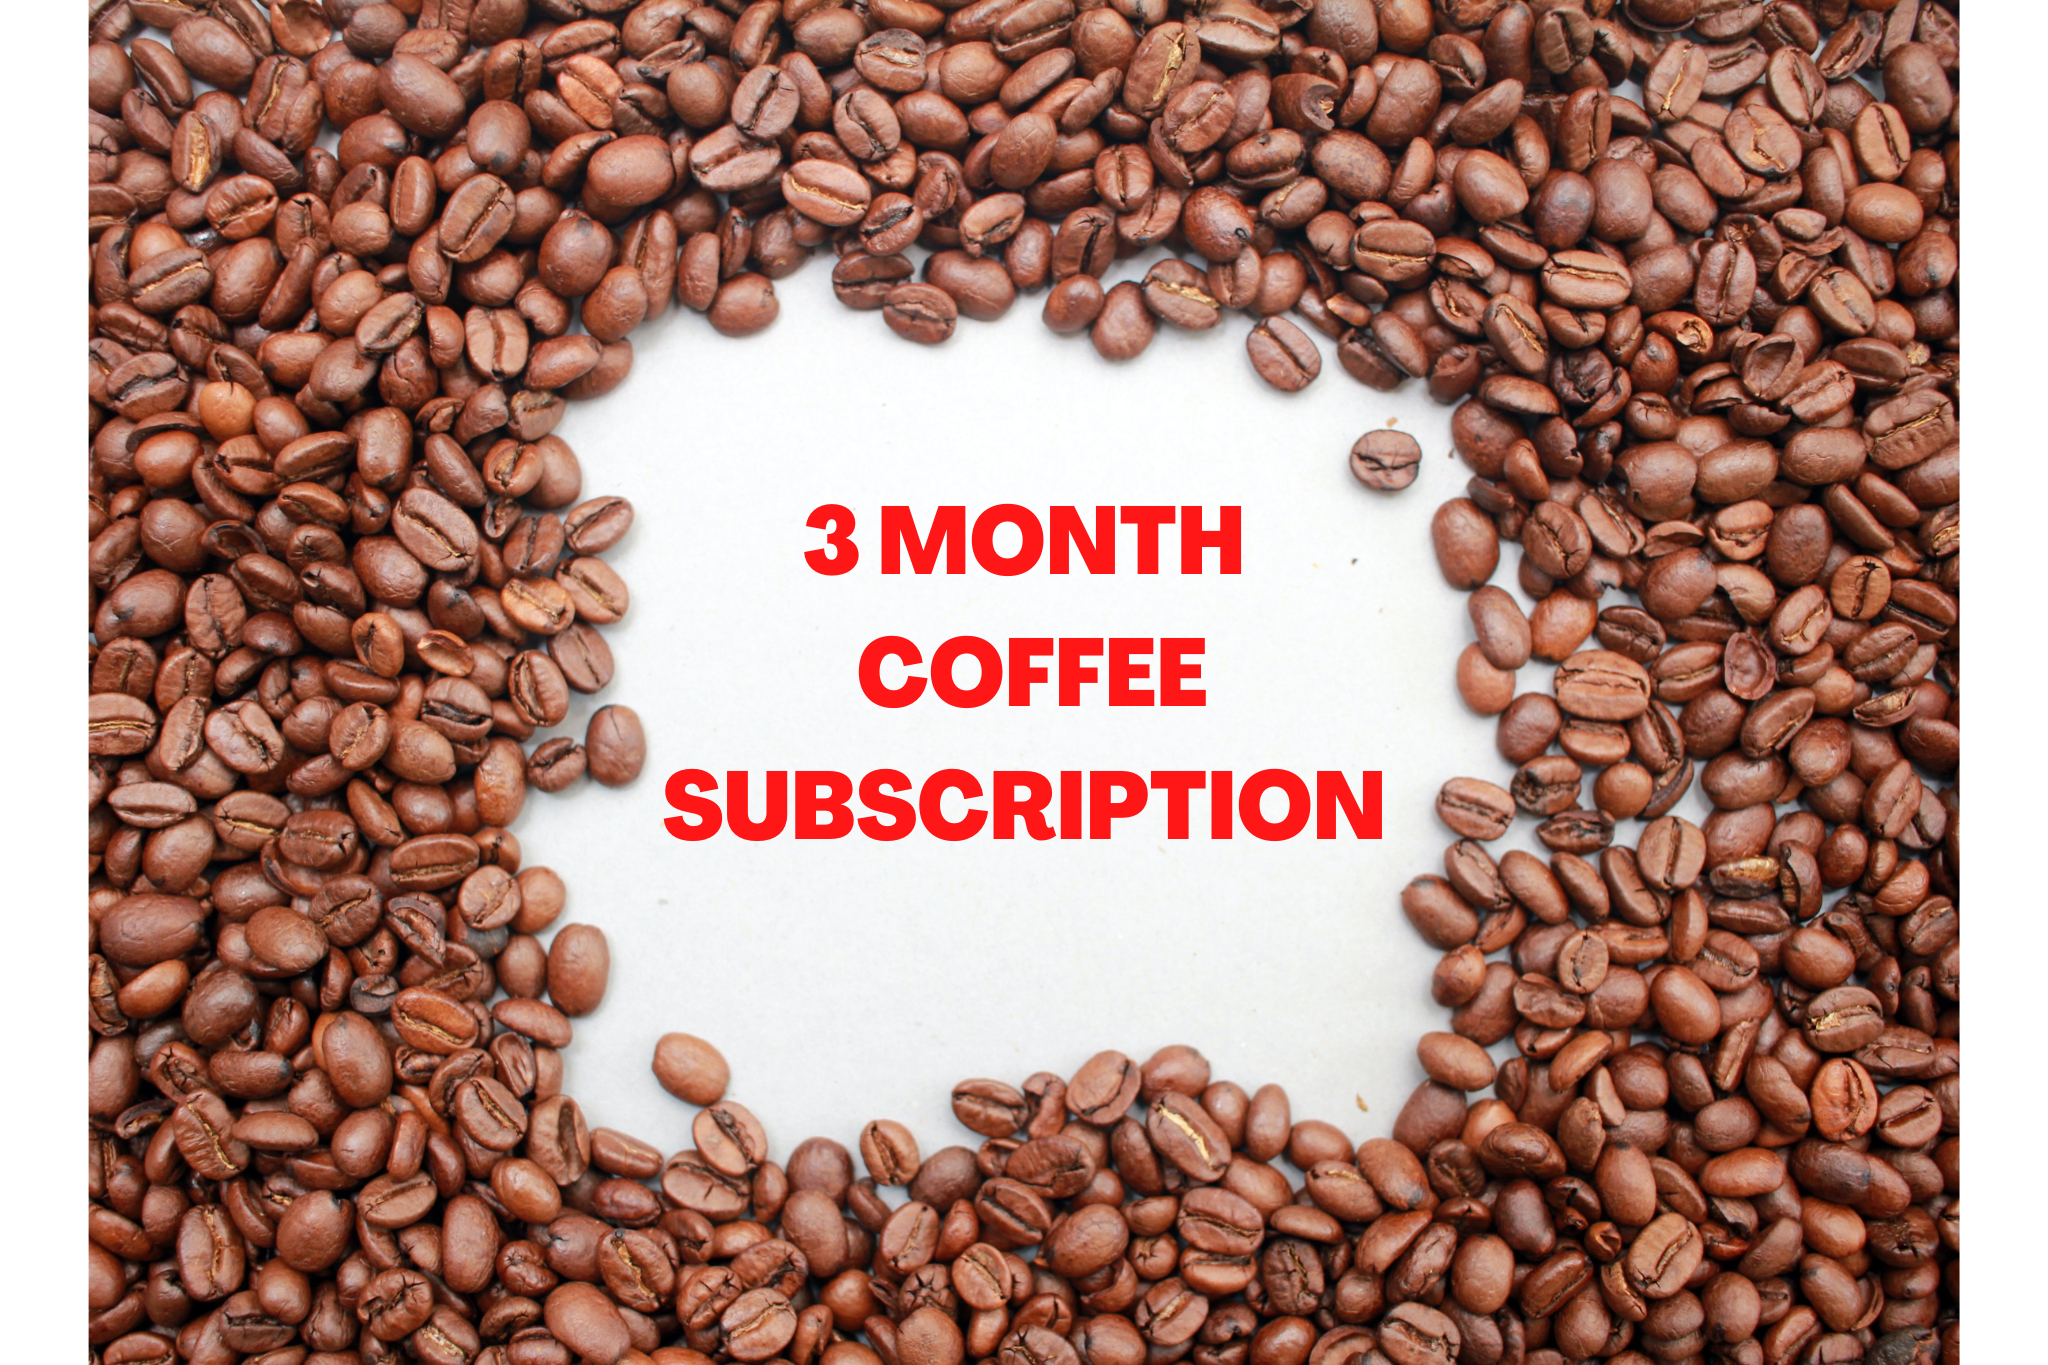 3 MONTH 12x COFFEE TASTING SUBSCRIPTION